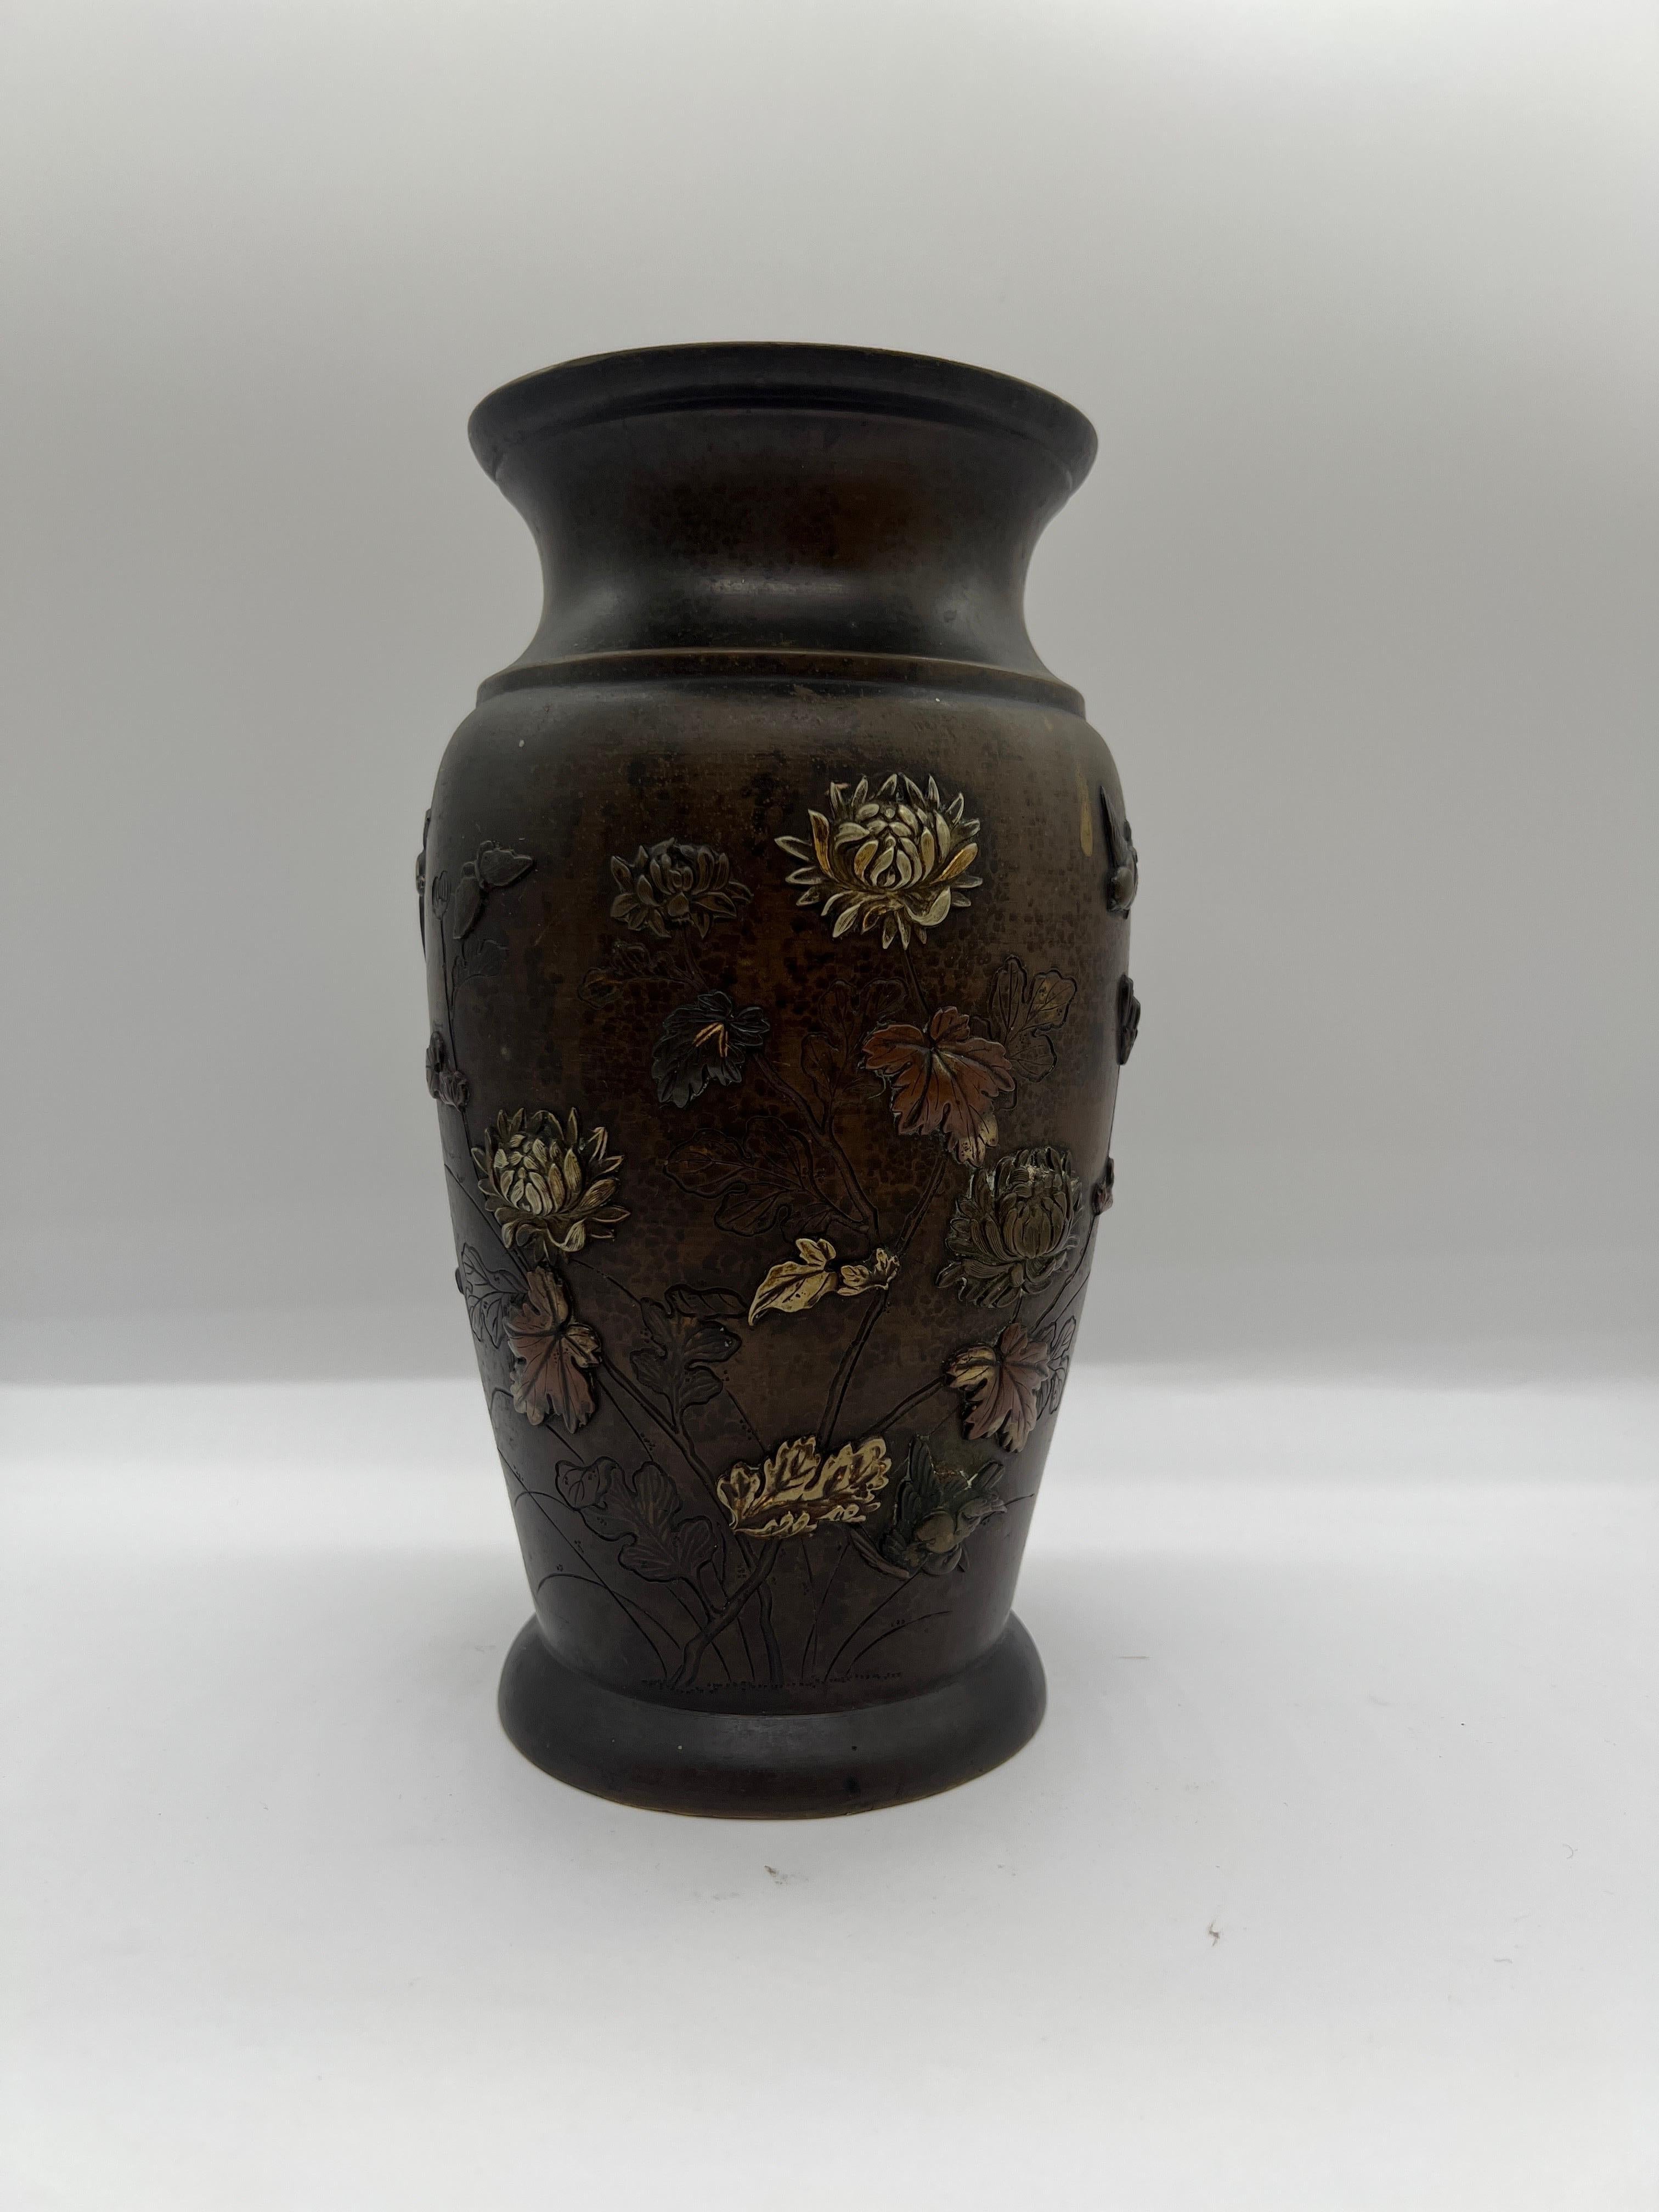 Japanese, Meiji Period.

An antique bronze vase constructed in bronze. The vase features several traditional designs including lotus blossoms, birds in flight and other floral detailing. Different metal materials have been used for this vase as